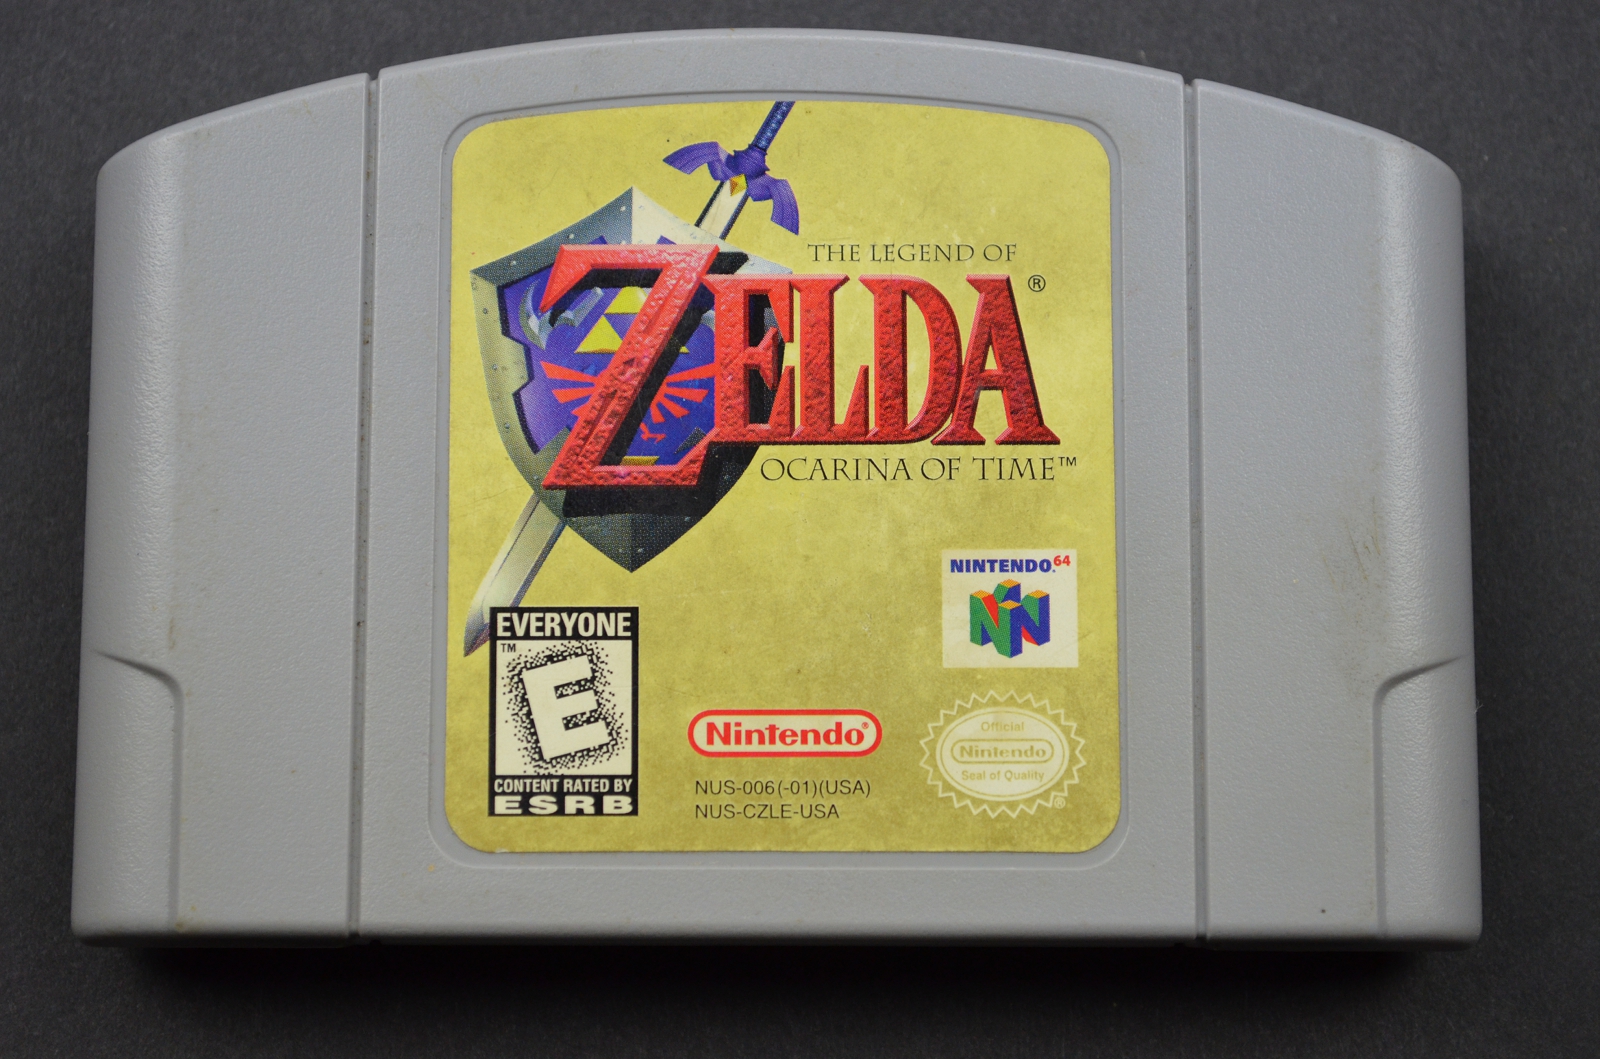  Game Cartridge for Zelda Ocarina of Time Master Quest Video  Game US Version Game Cartridge for N64 Game Console A Great Gift for Gamers  : Video Games